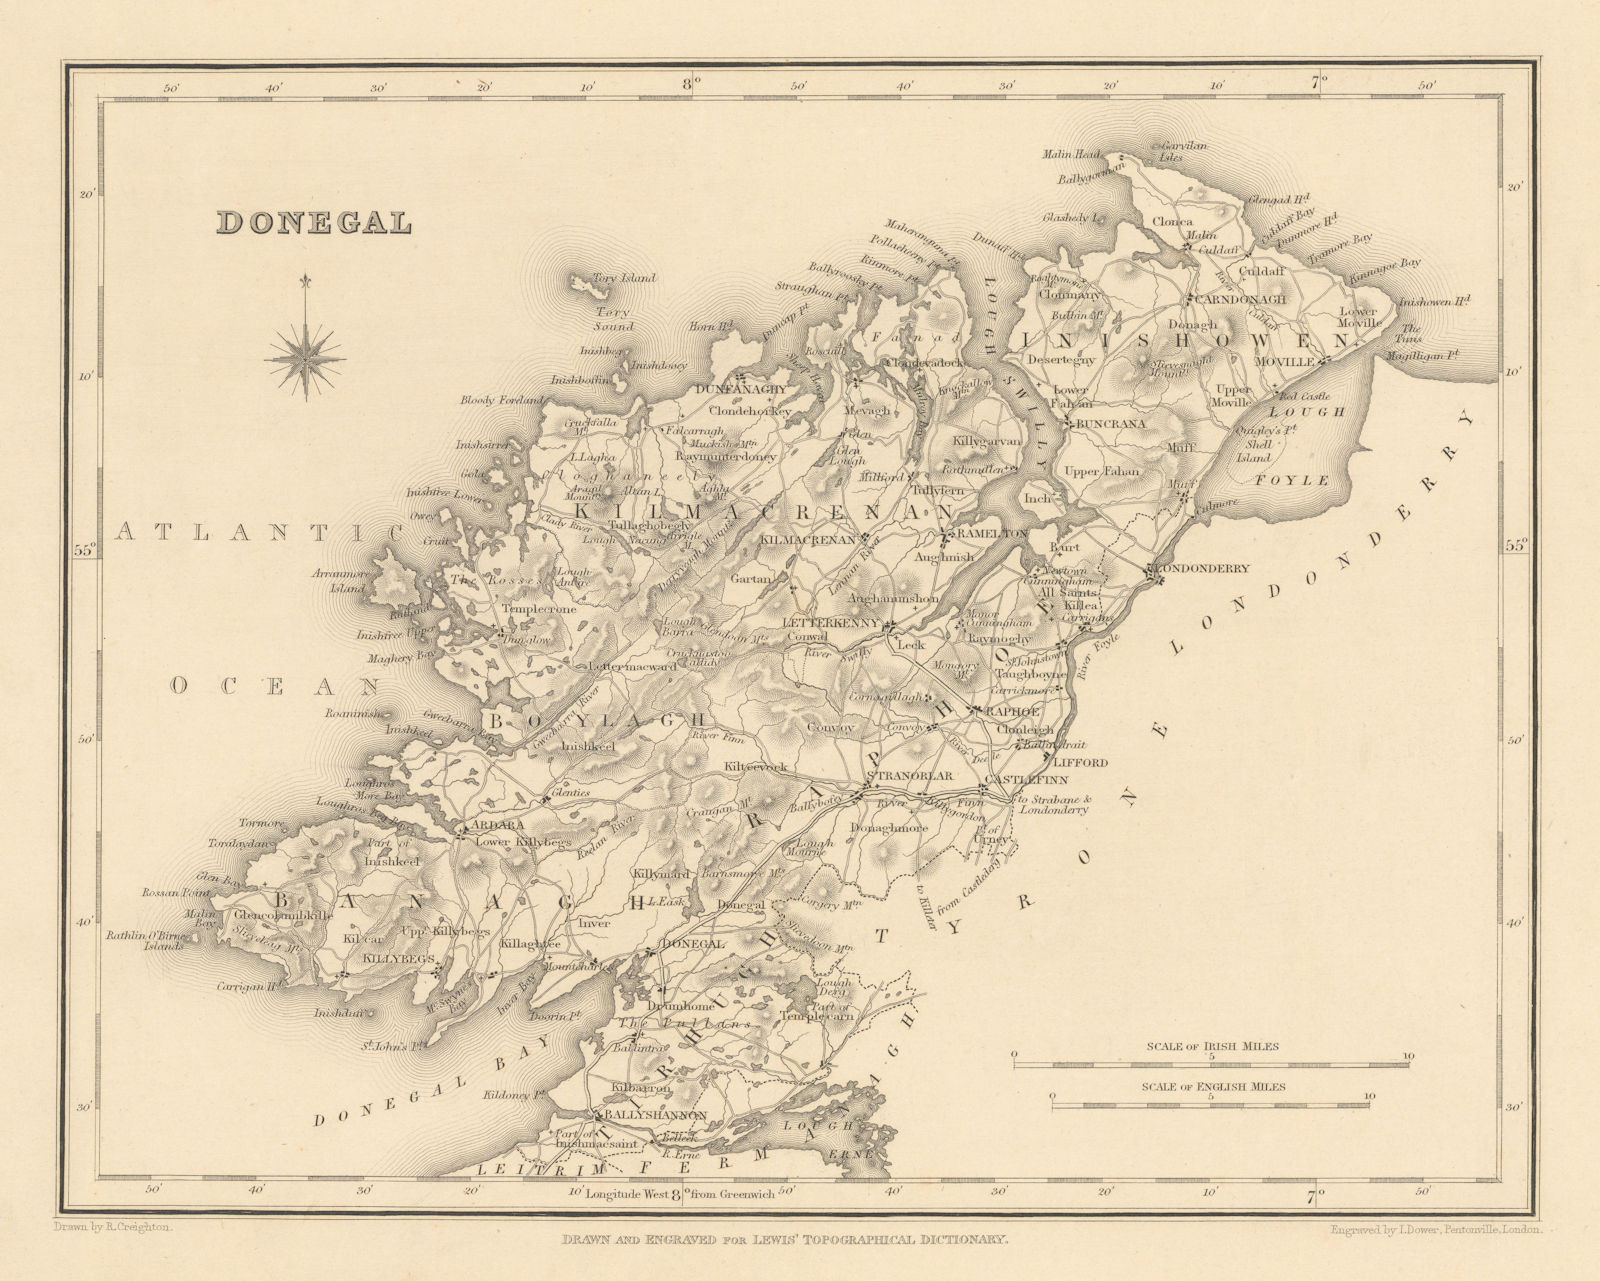 COUNTY DONEGAL antique map for LEWIS by CREIGHTON & DOWER - Ireland 1837